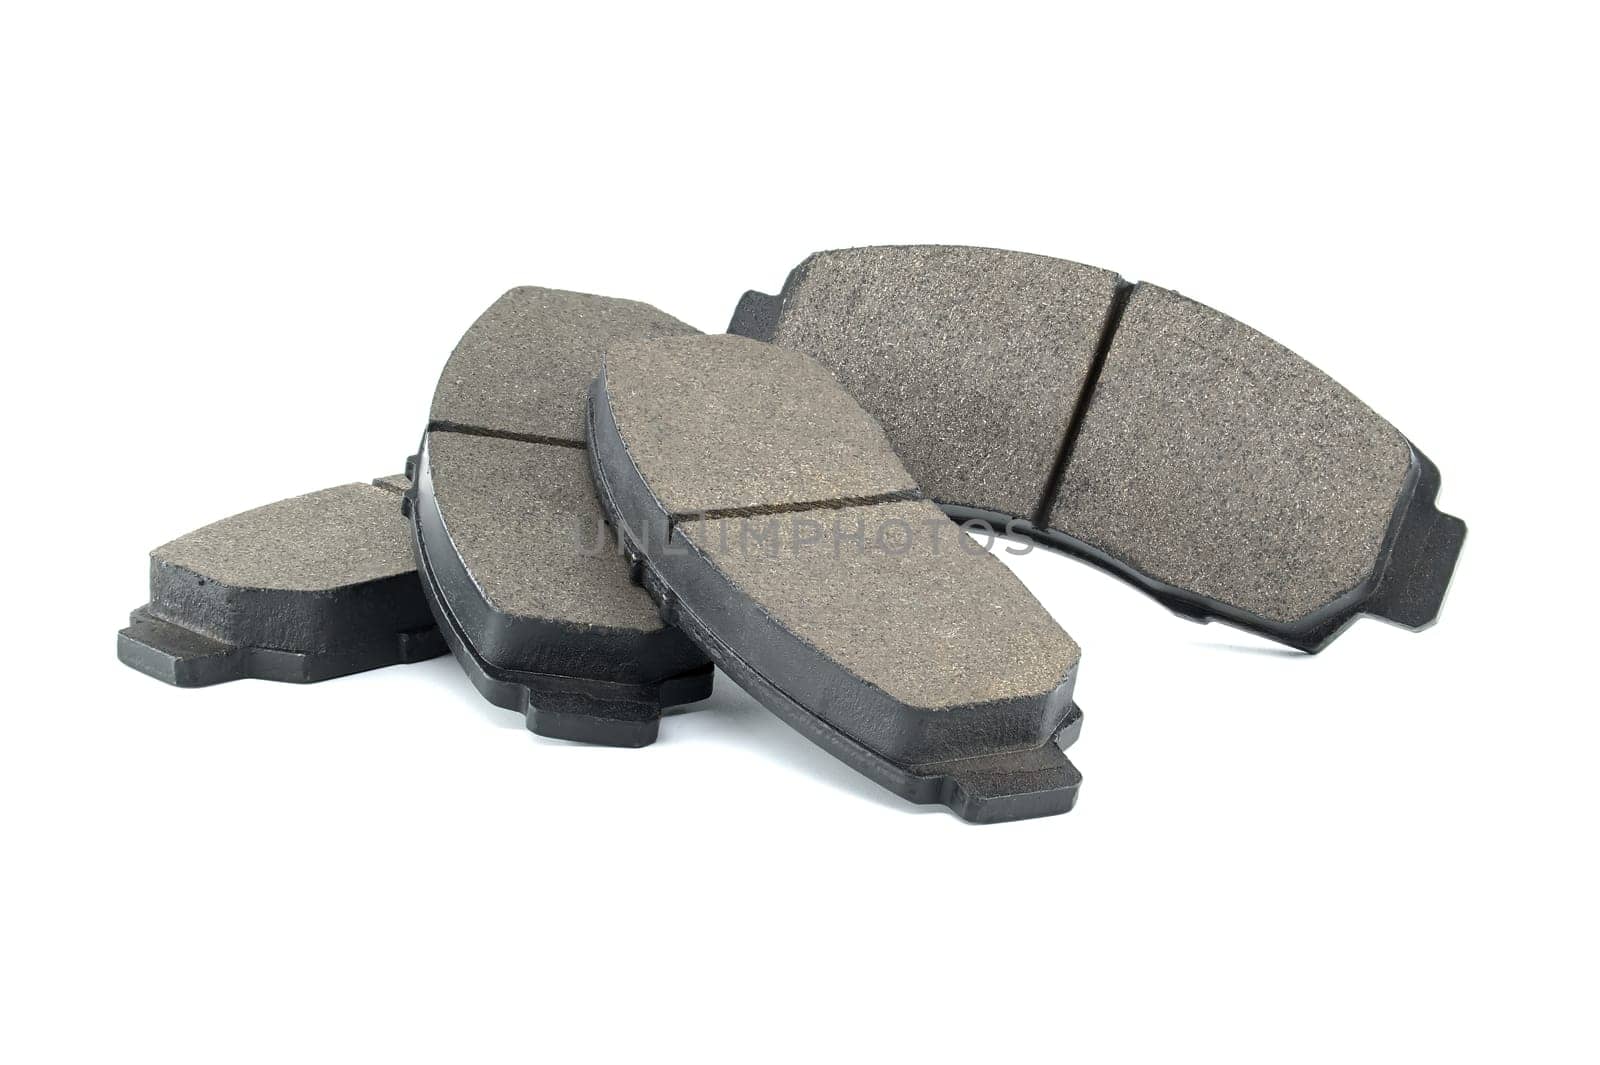 Brake pads isolated on white background by NetPix